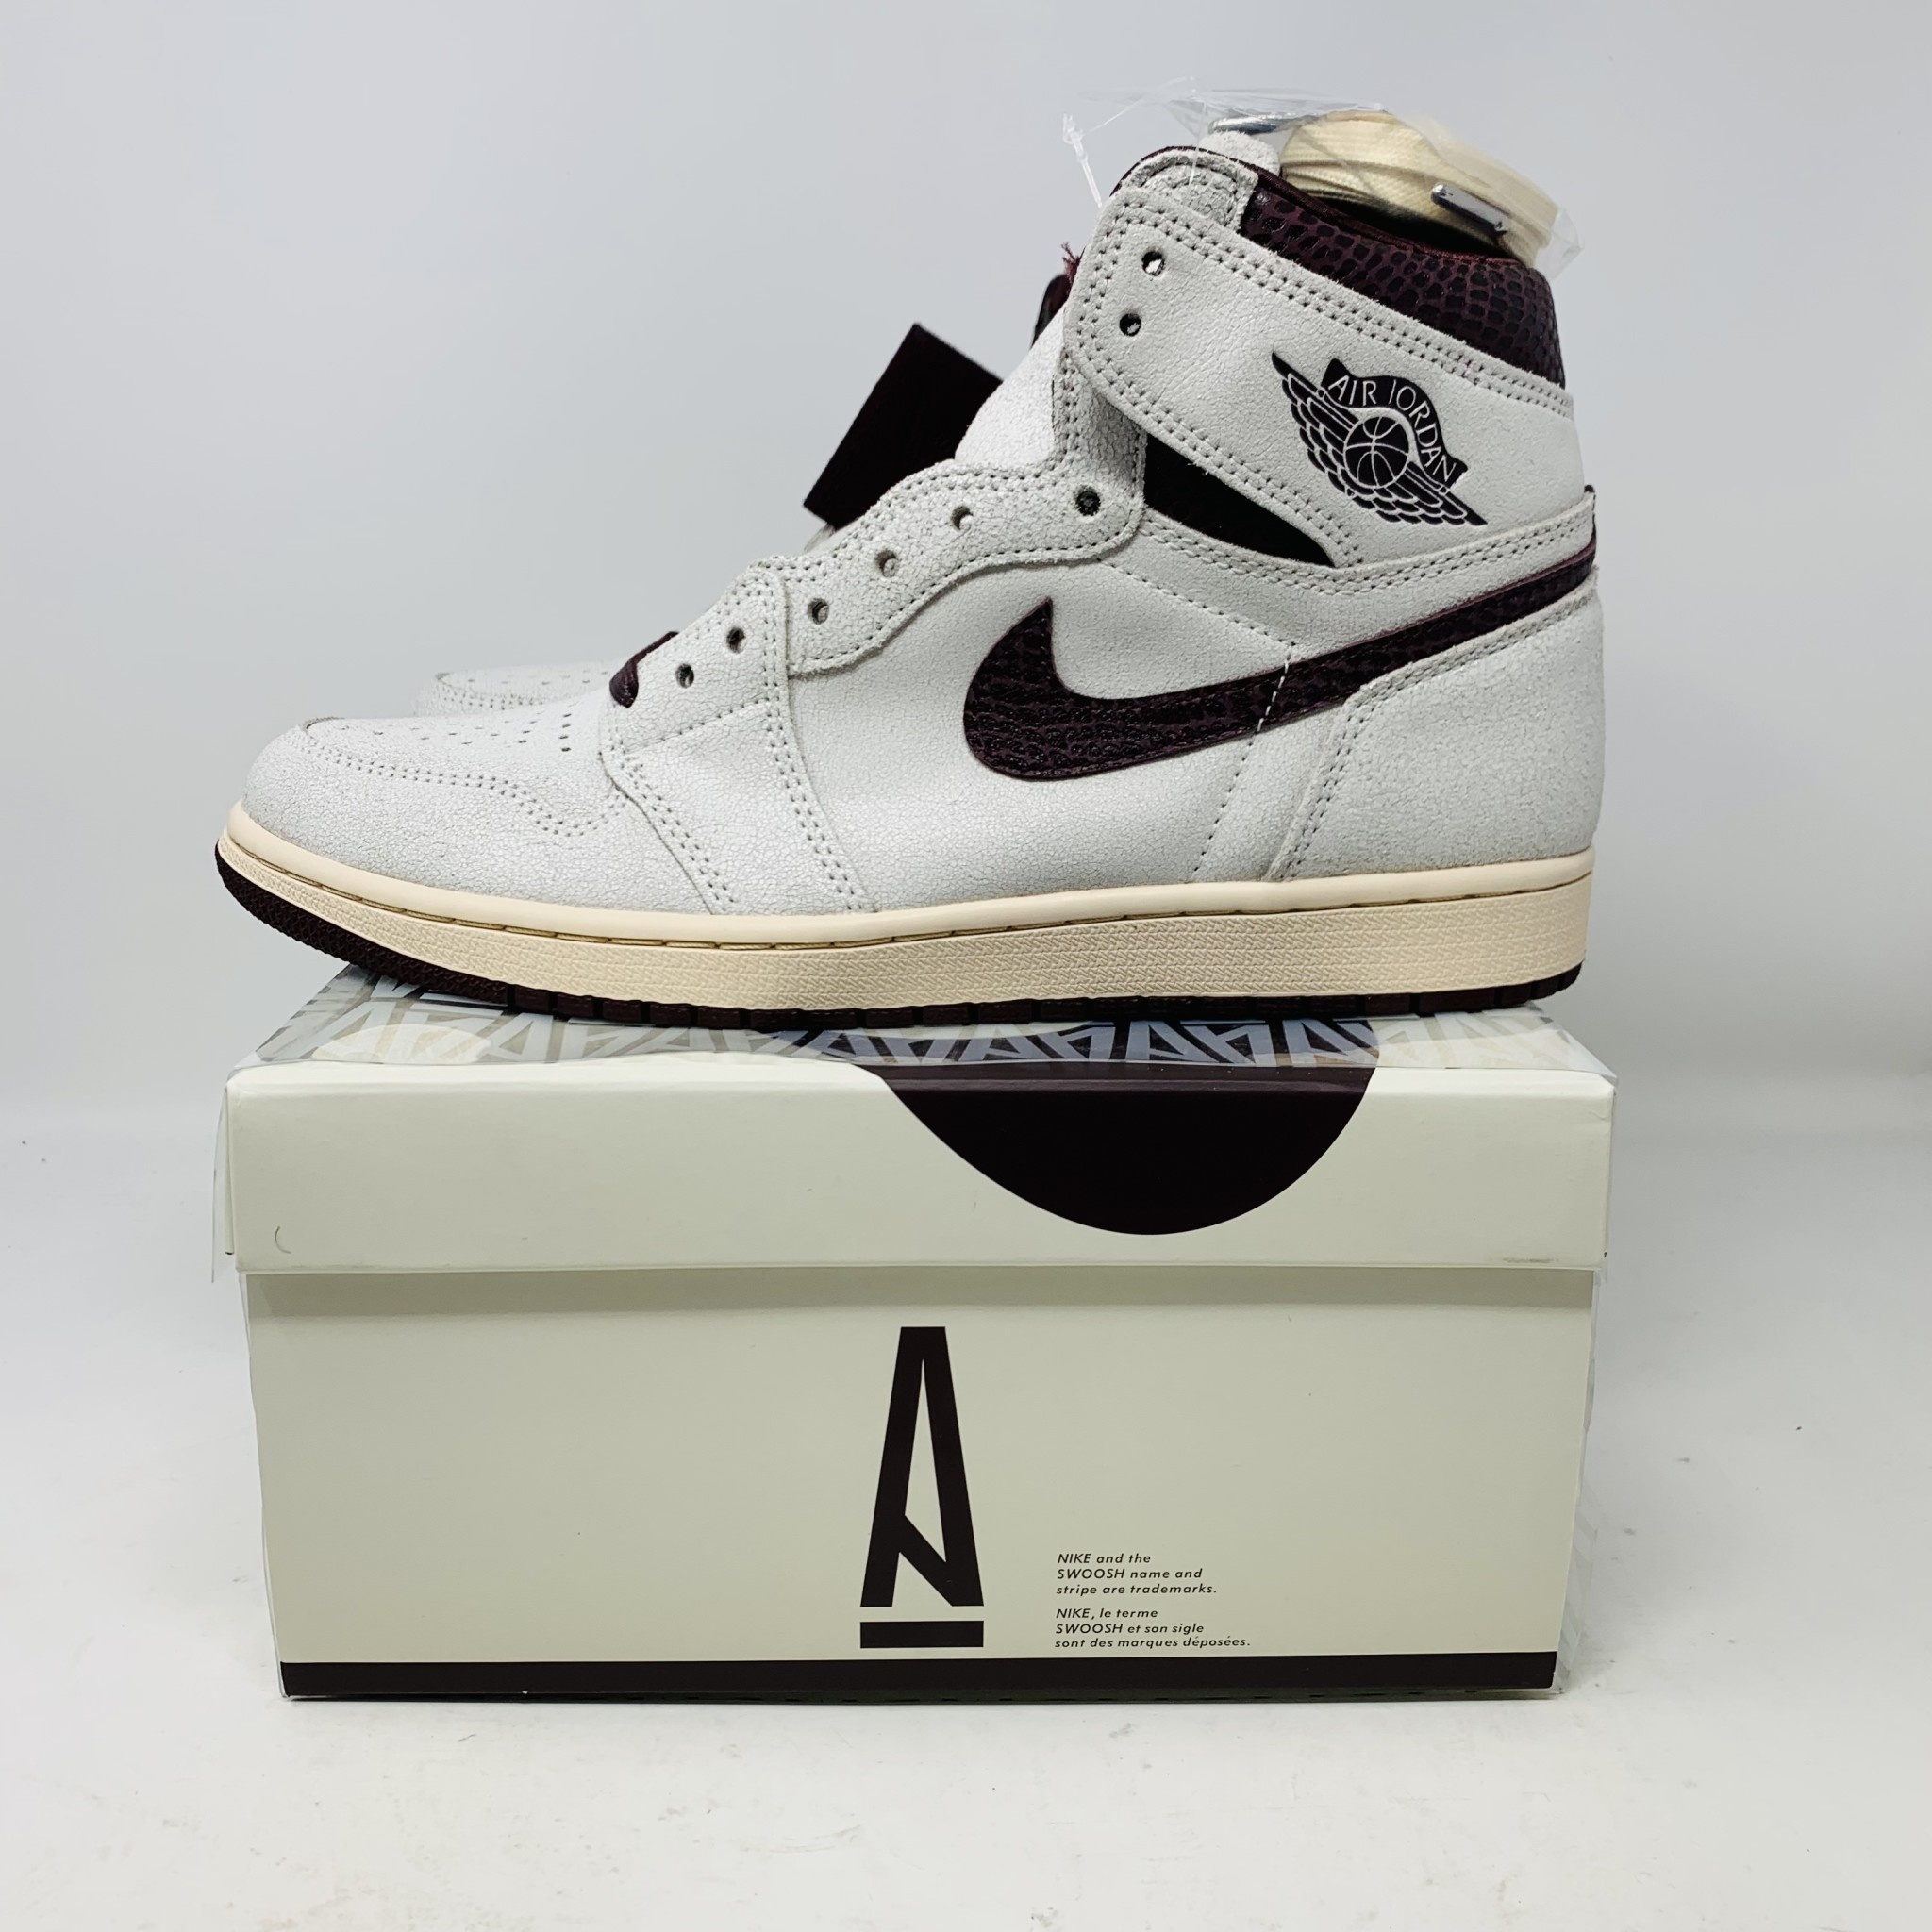 Jordan 1 A Ma Maniere - Holy Ground Sneaker Shop - Buy, Sell & Trade ...